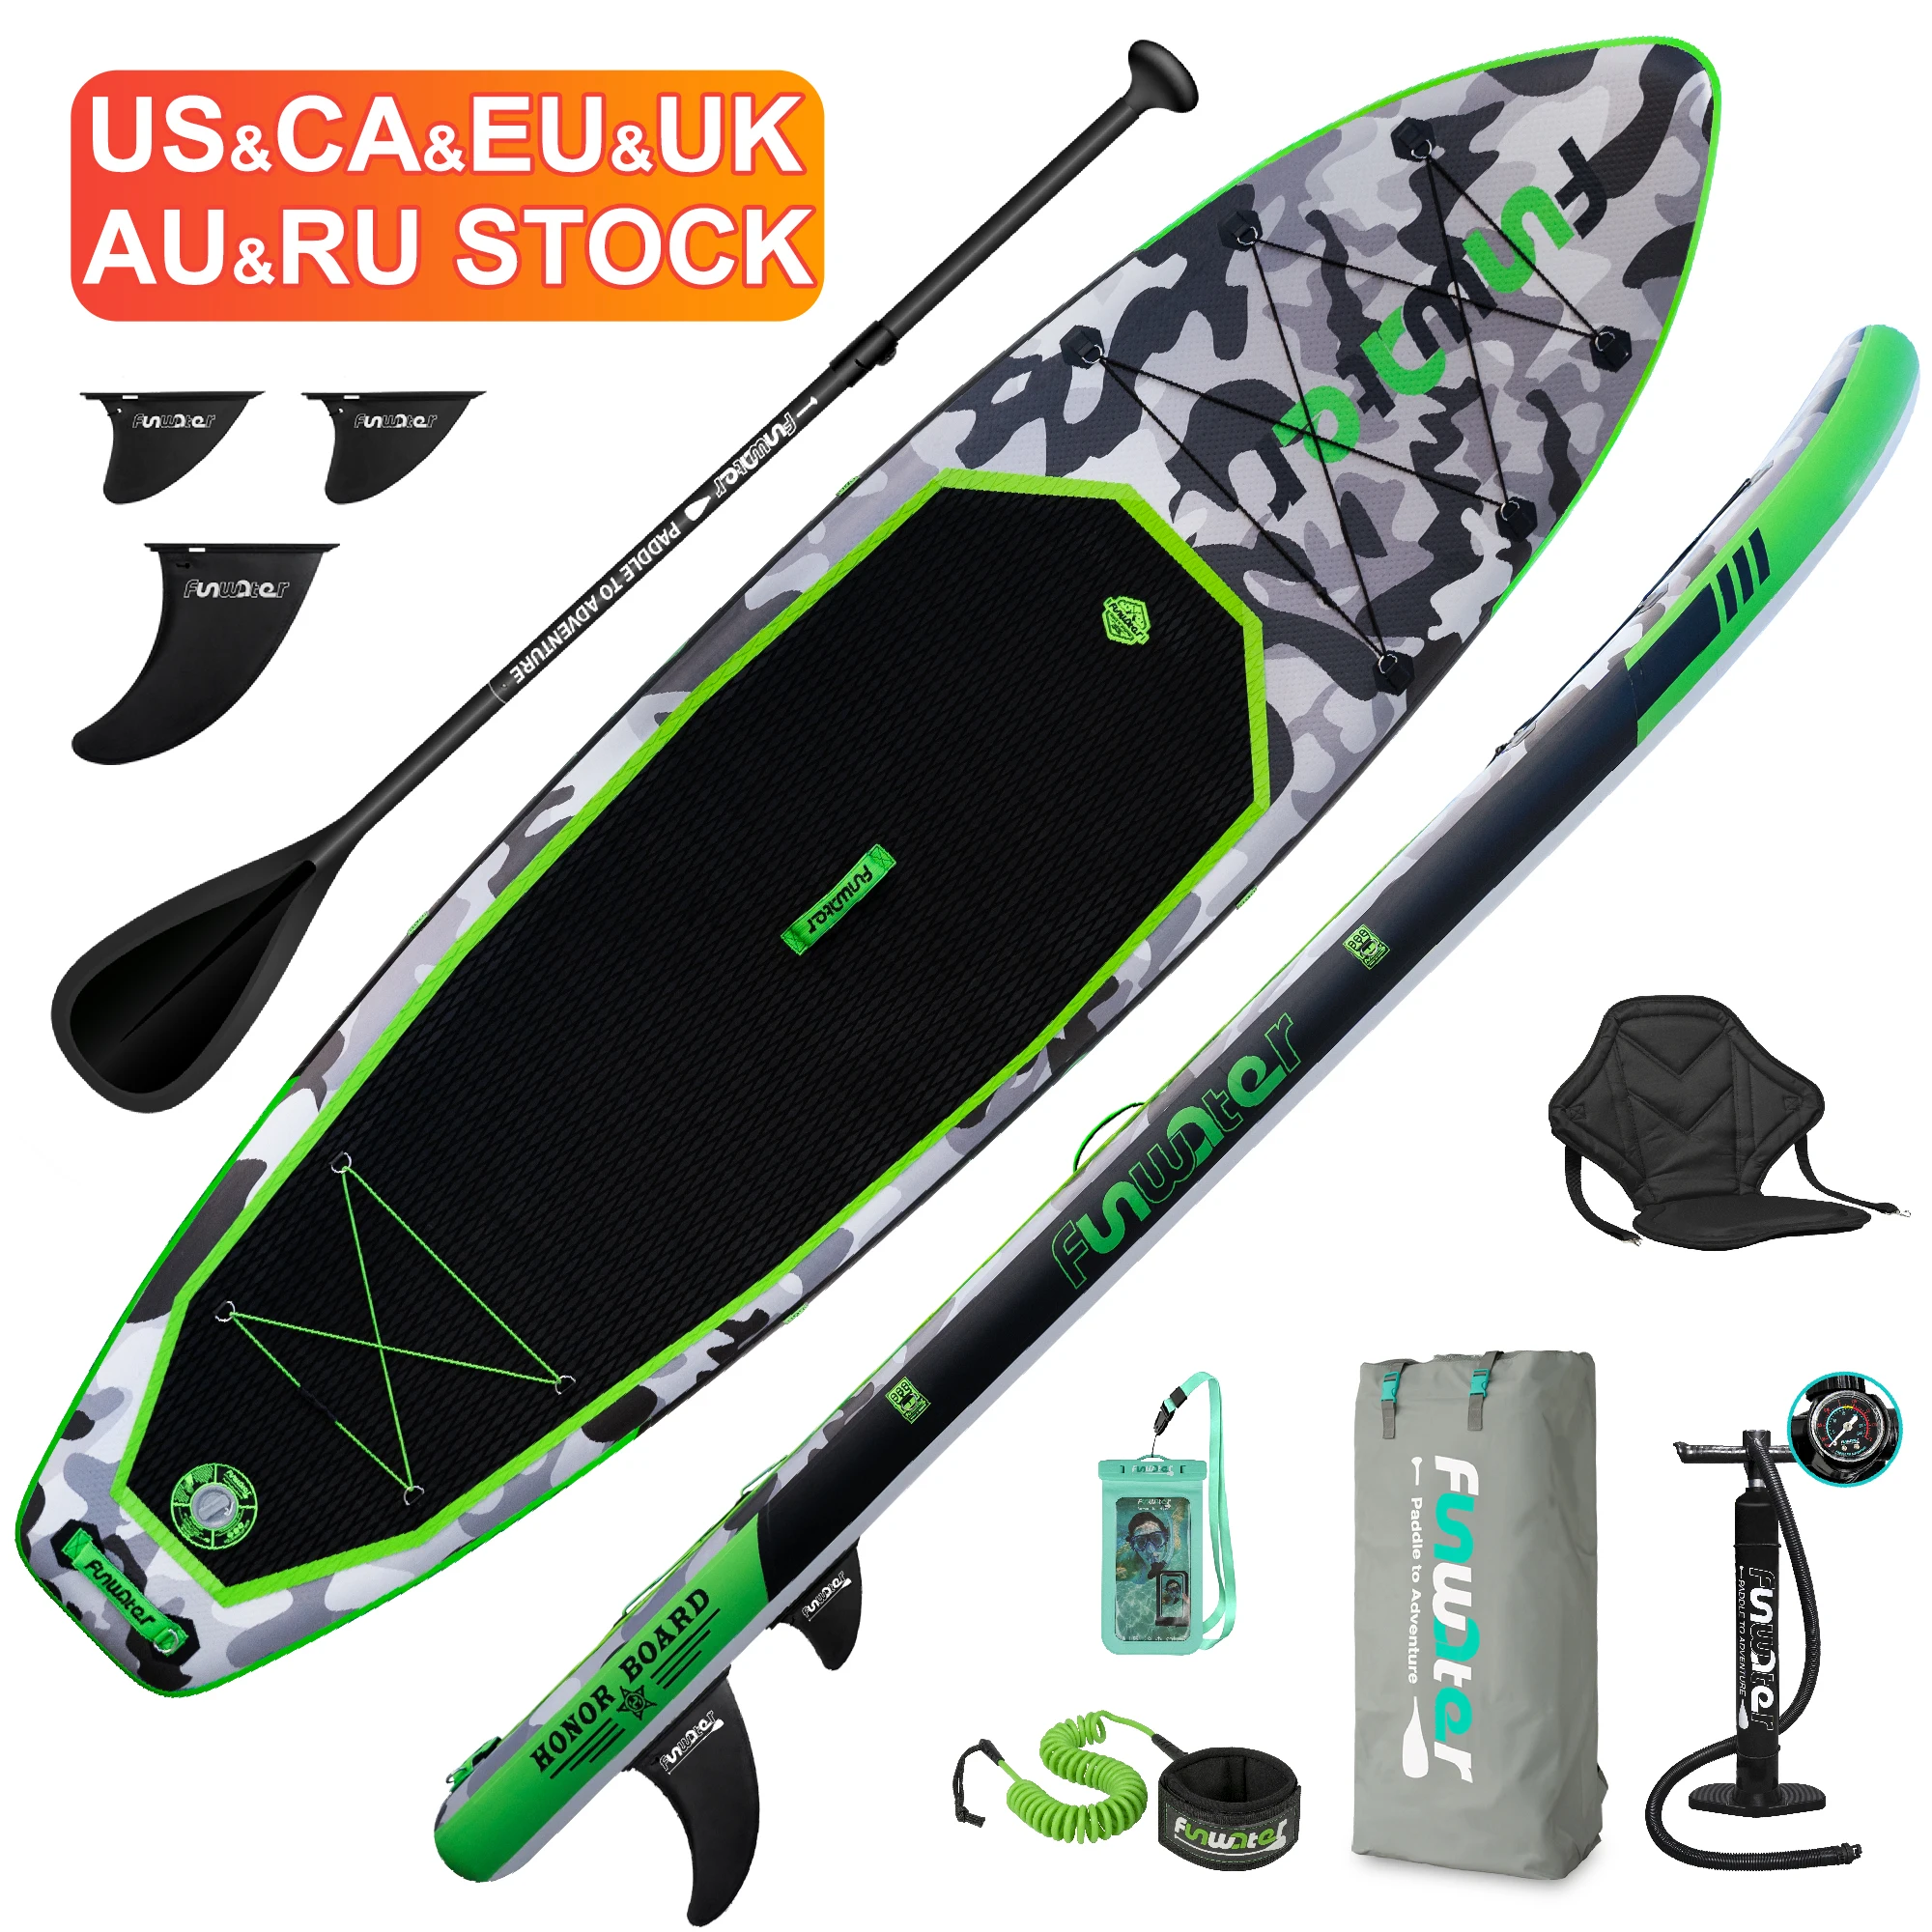 

FUNWATER Dropshipping OEM 11' Surfboard stand up black paddle board for sale sup water sporting surfing surfboard paddleboard